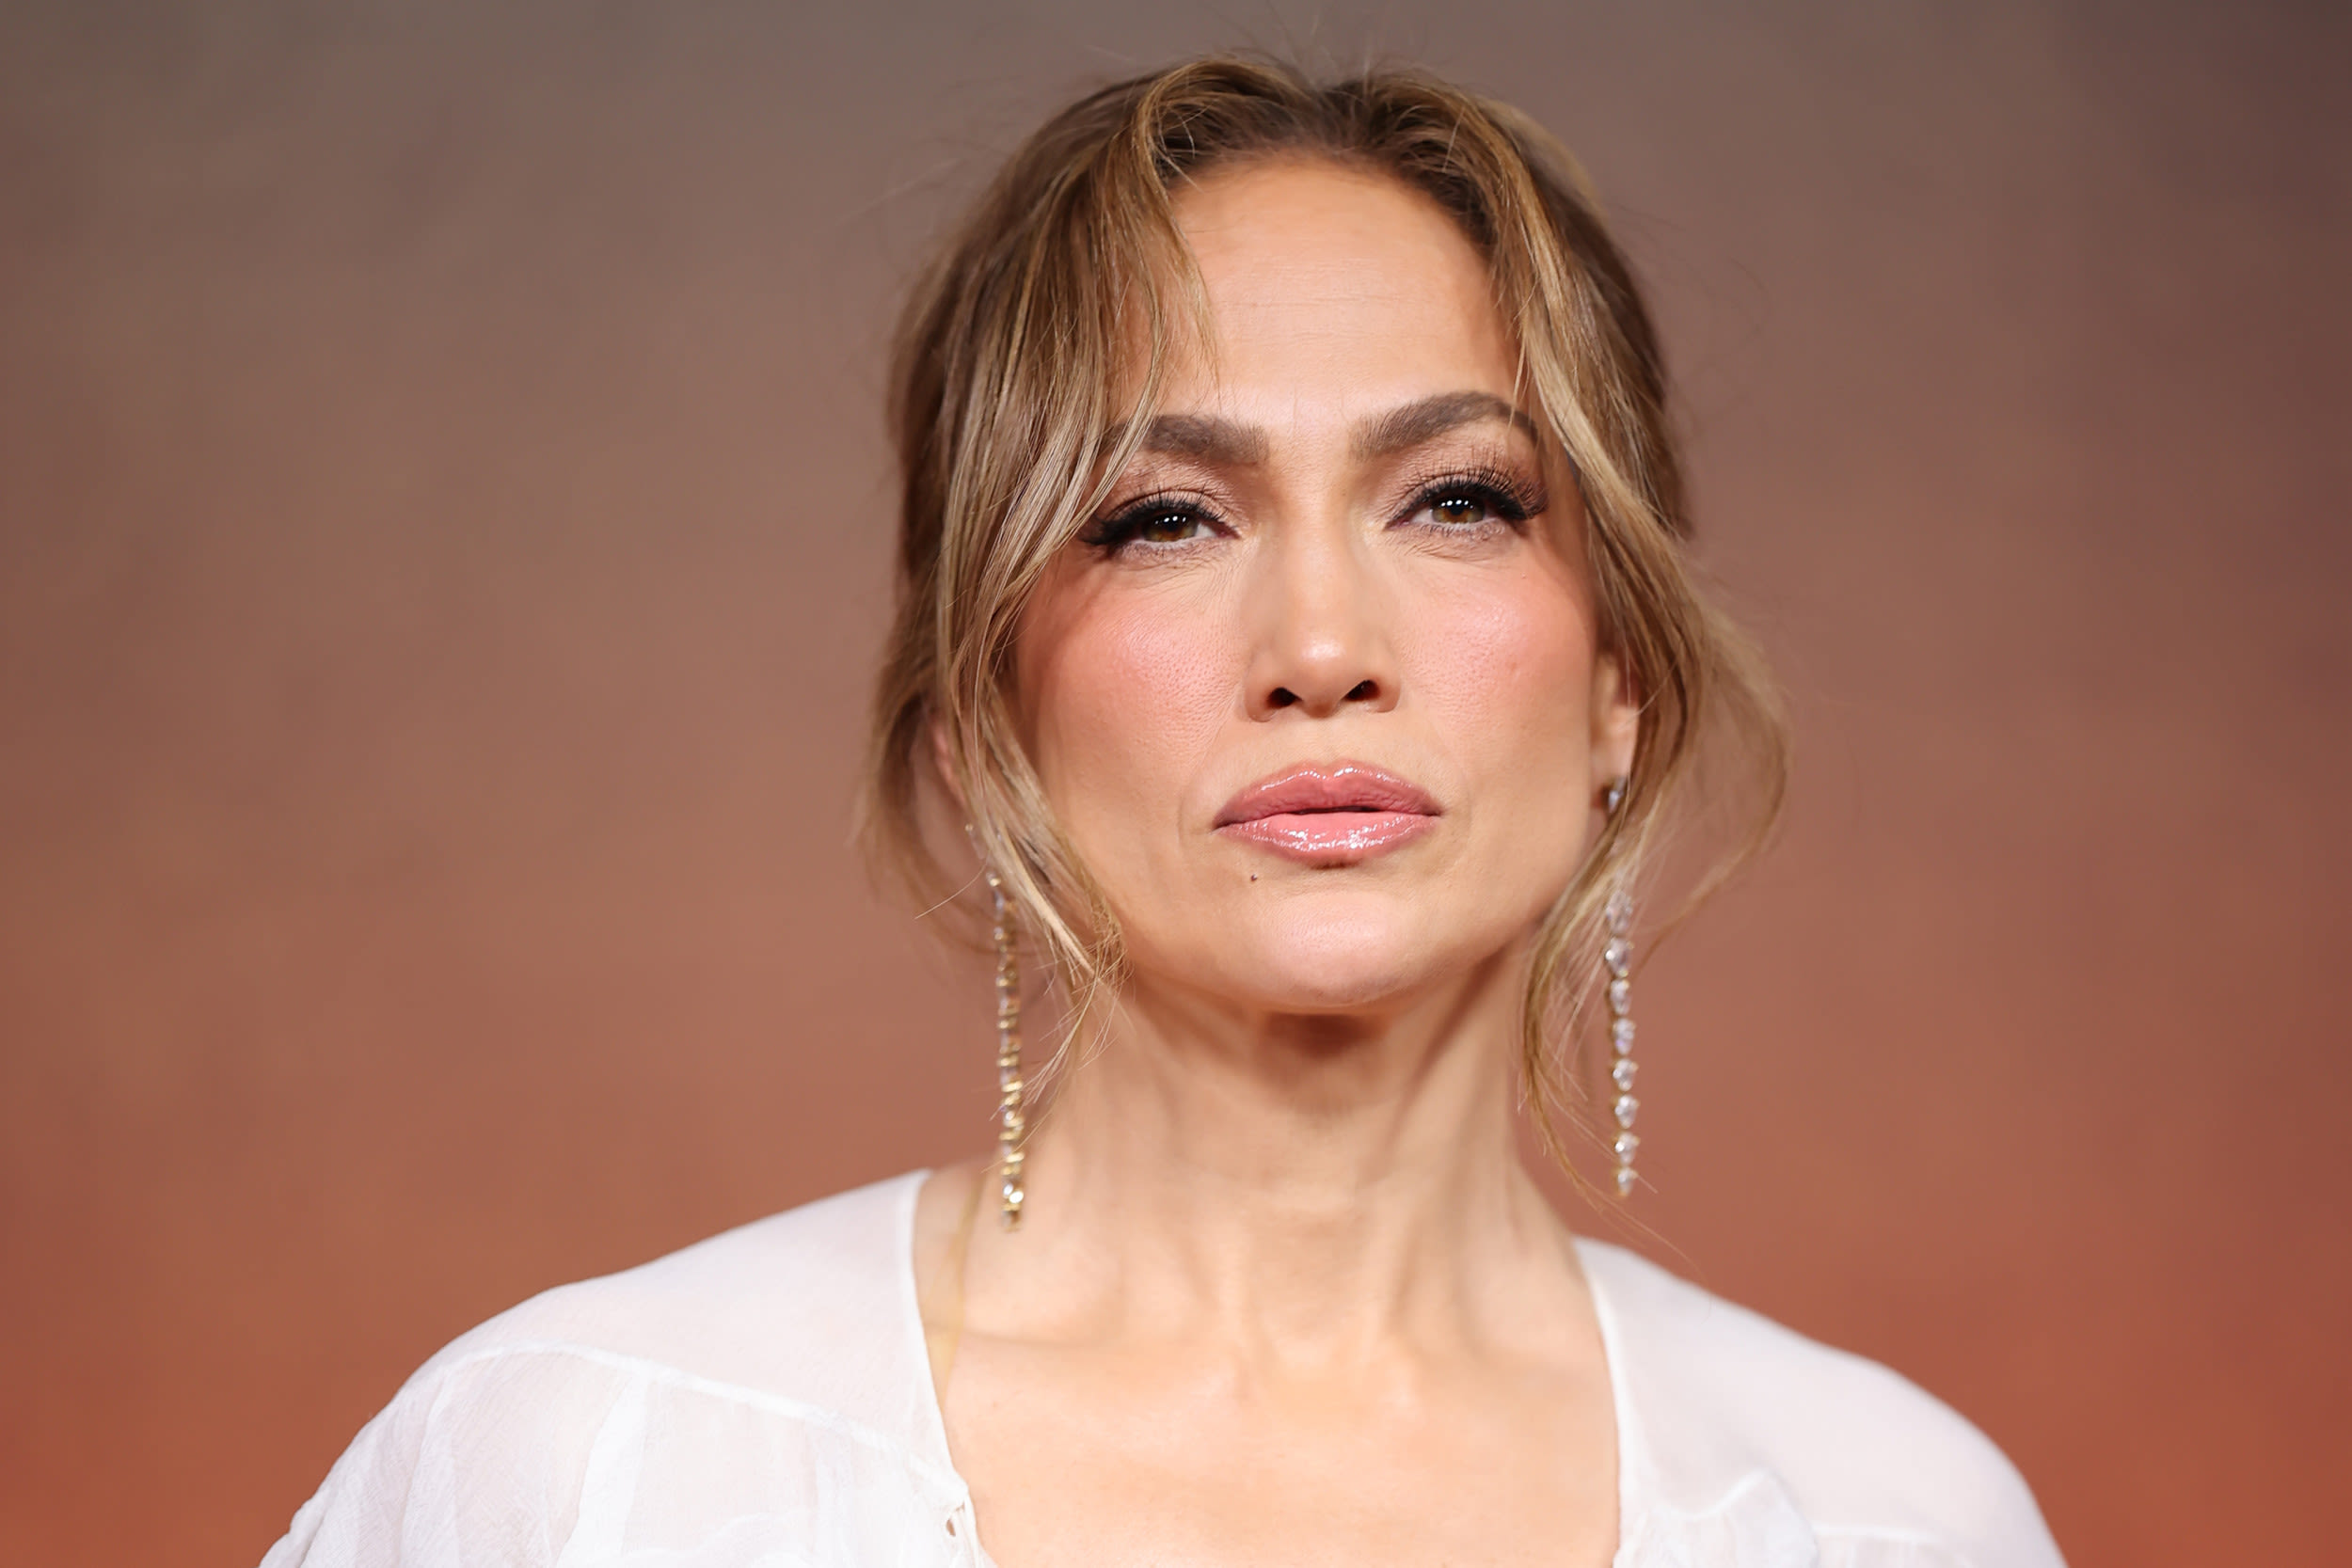 Why Jennifer Lopez claims her face was stolen